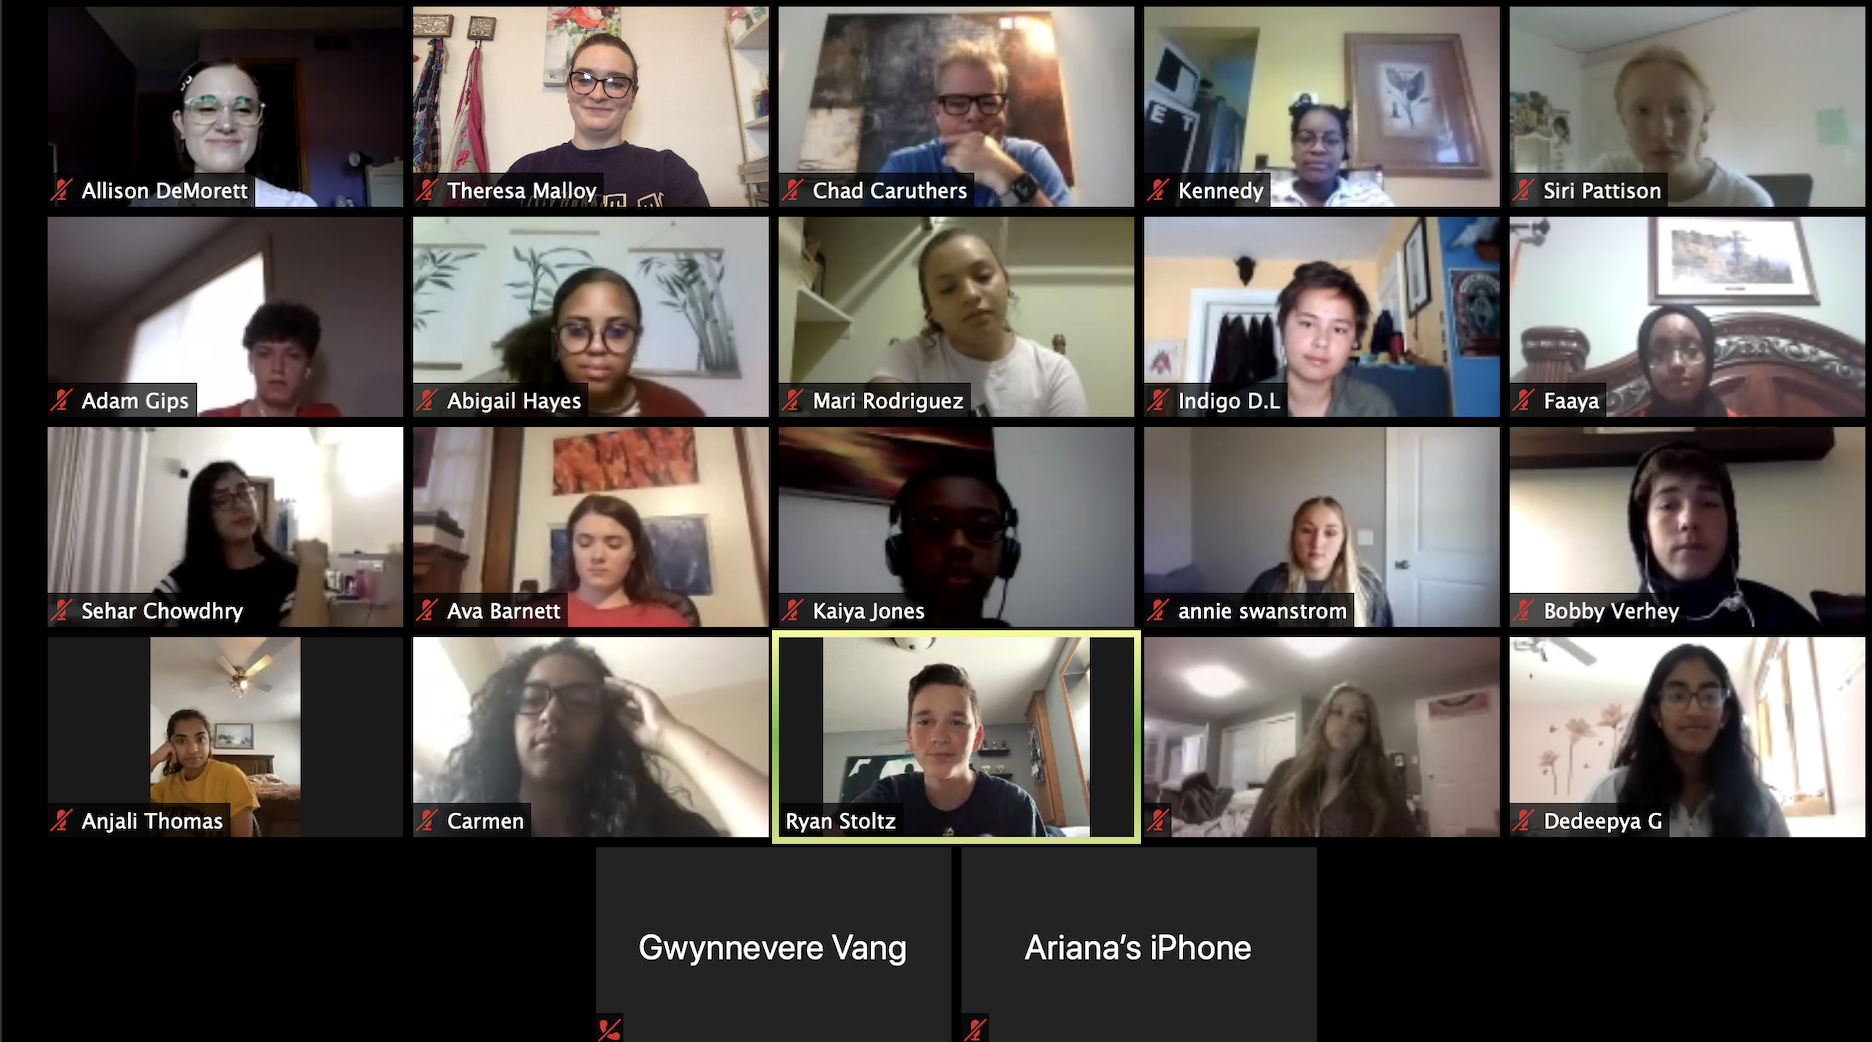 This is a screenshot of the Zoom call for our virtual News Reporter Academy. It displays nineteen students, and three ThreeSixty staff members.